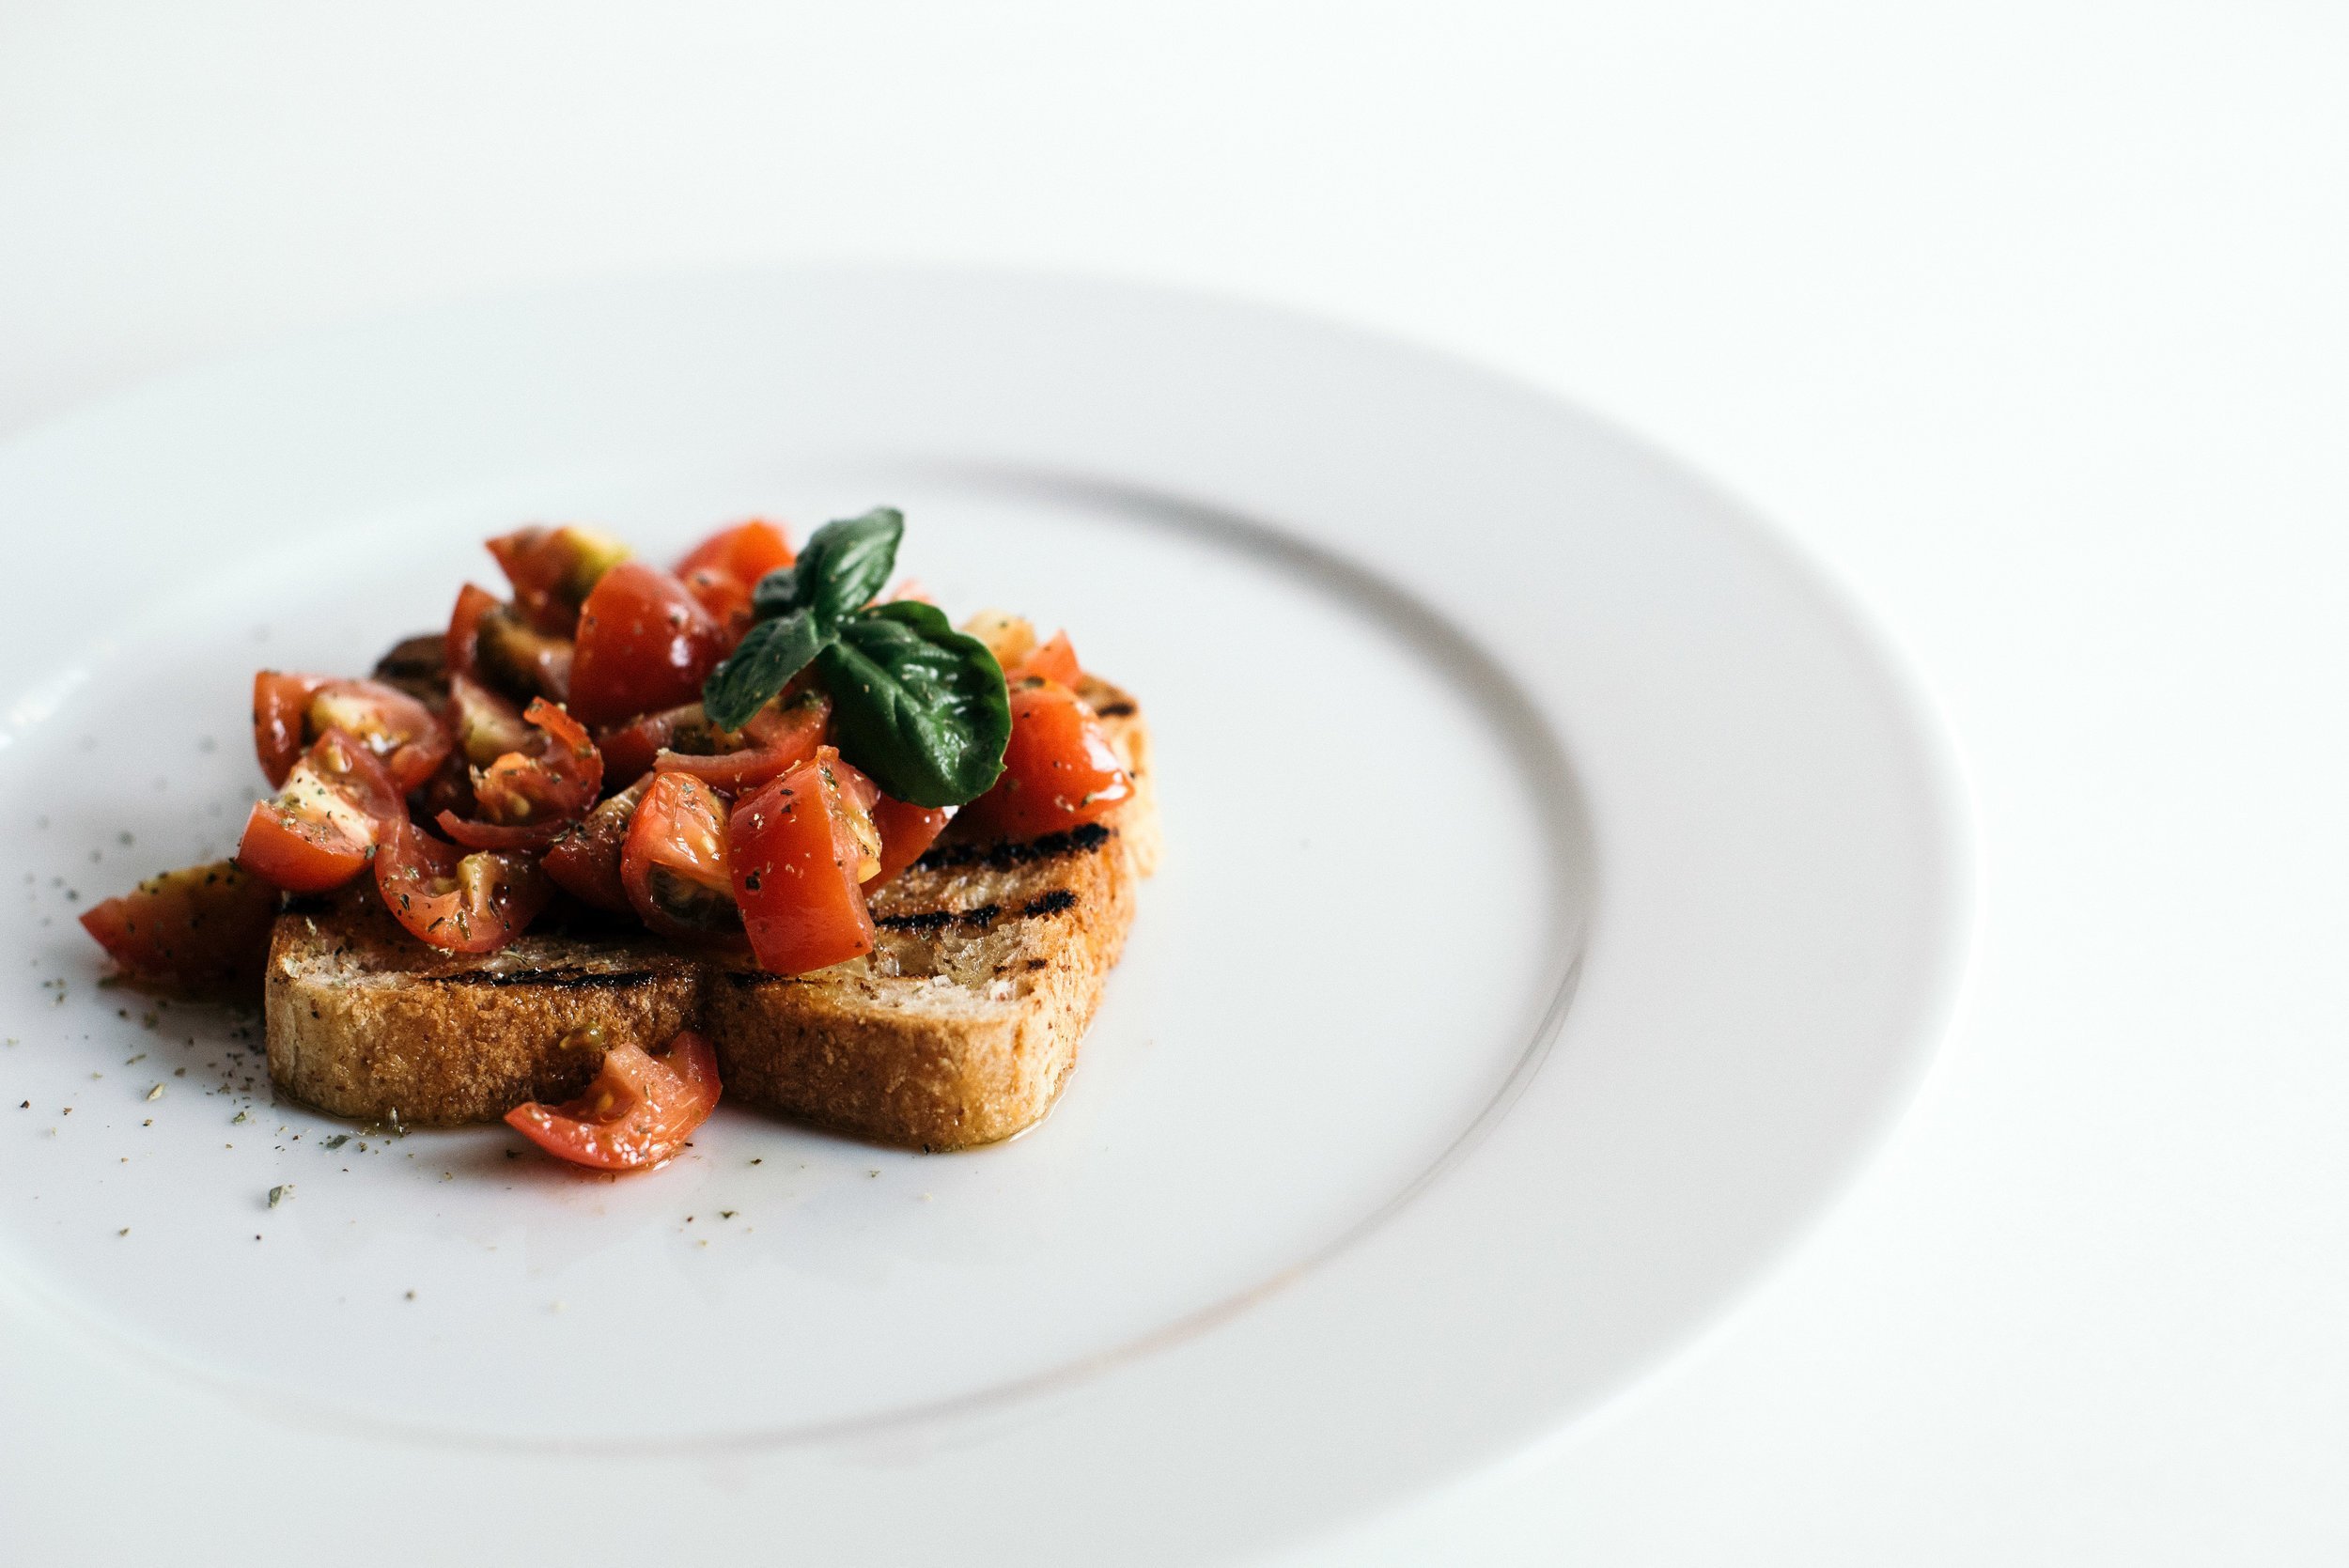 A plate with toast and tomatoes, a delicious and healthy breakfast option.jpg